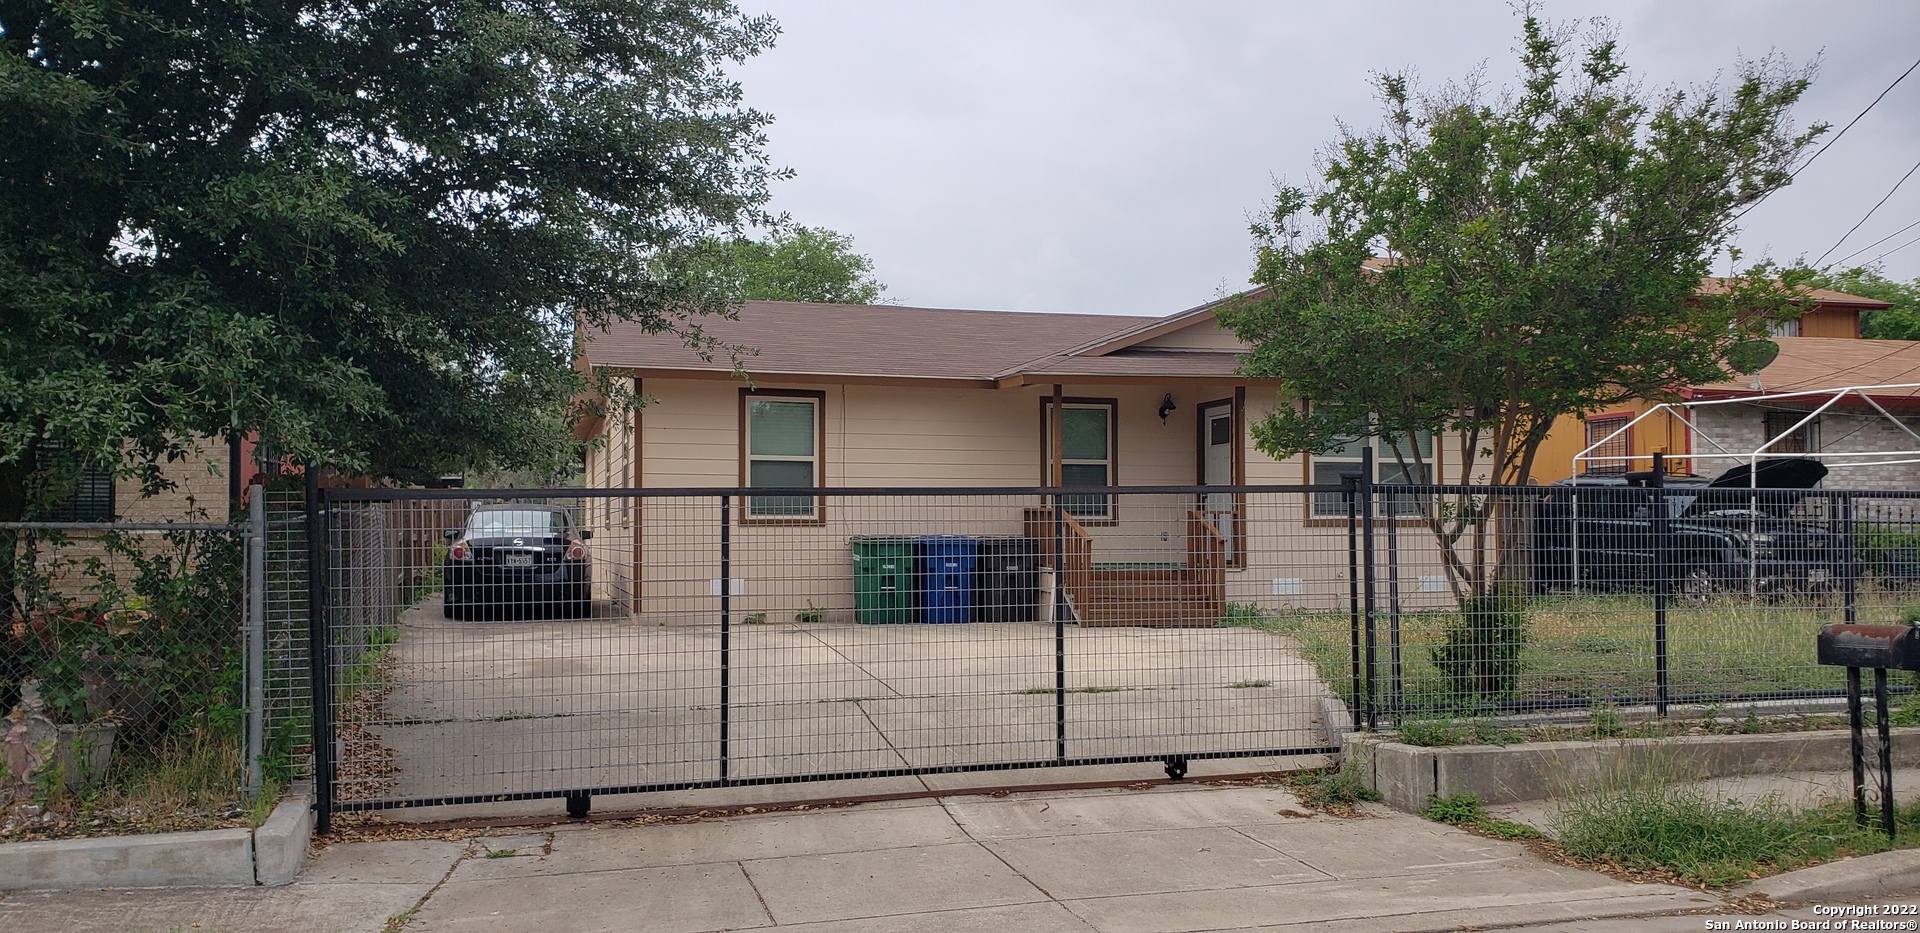 Investors special, come take a look at this 4 bedroom home that is currently under lease. House is being sold "AS IS". Seller will make very few repairs.  Do not disturb tenants current lease expires 12/21/2022.